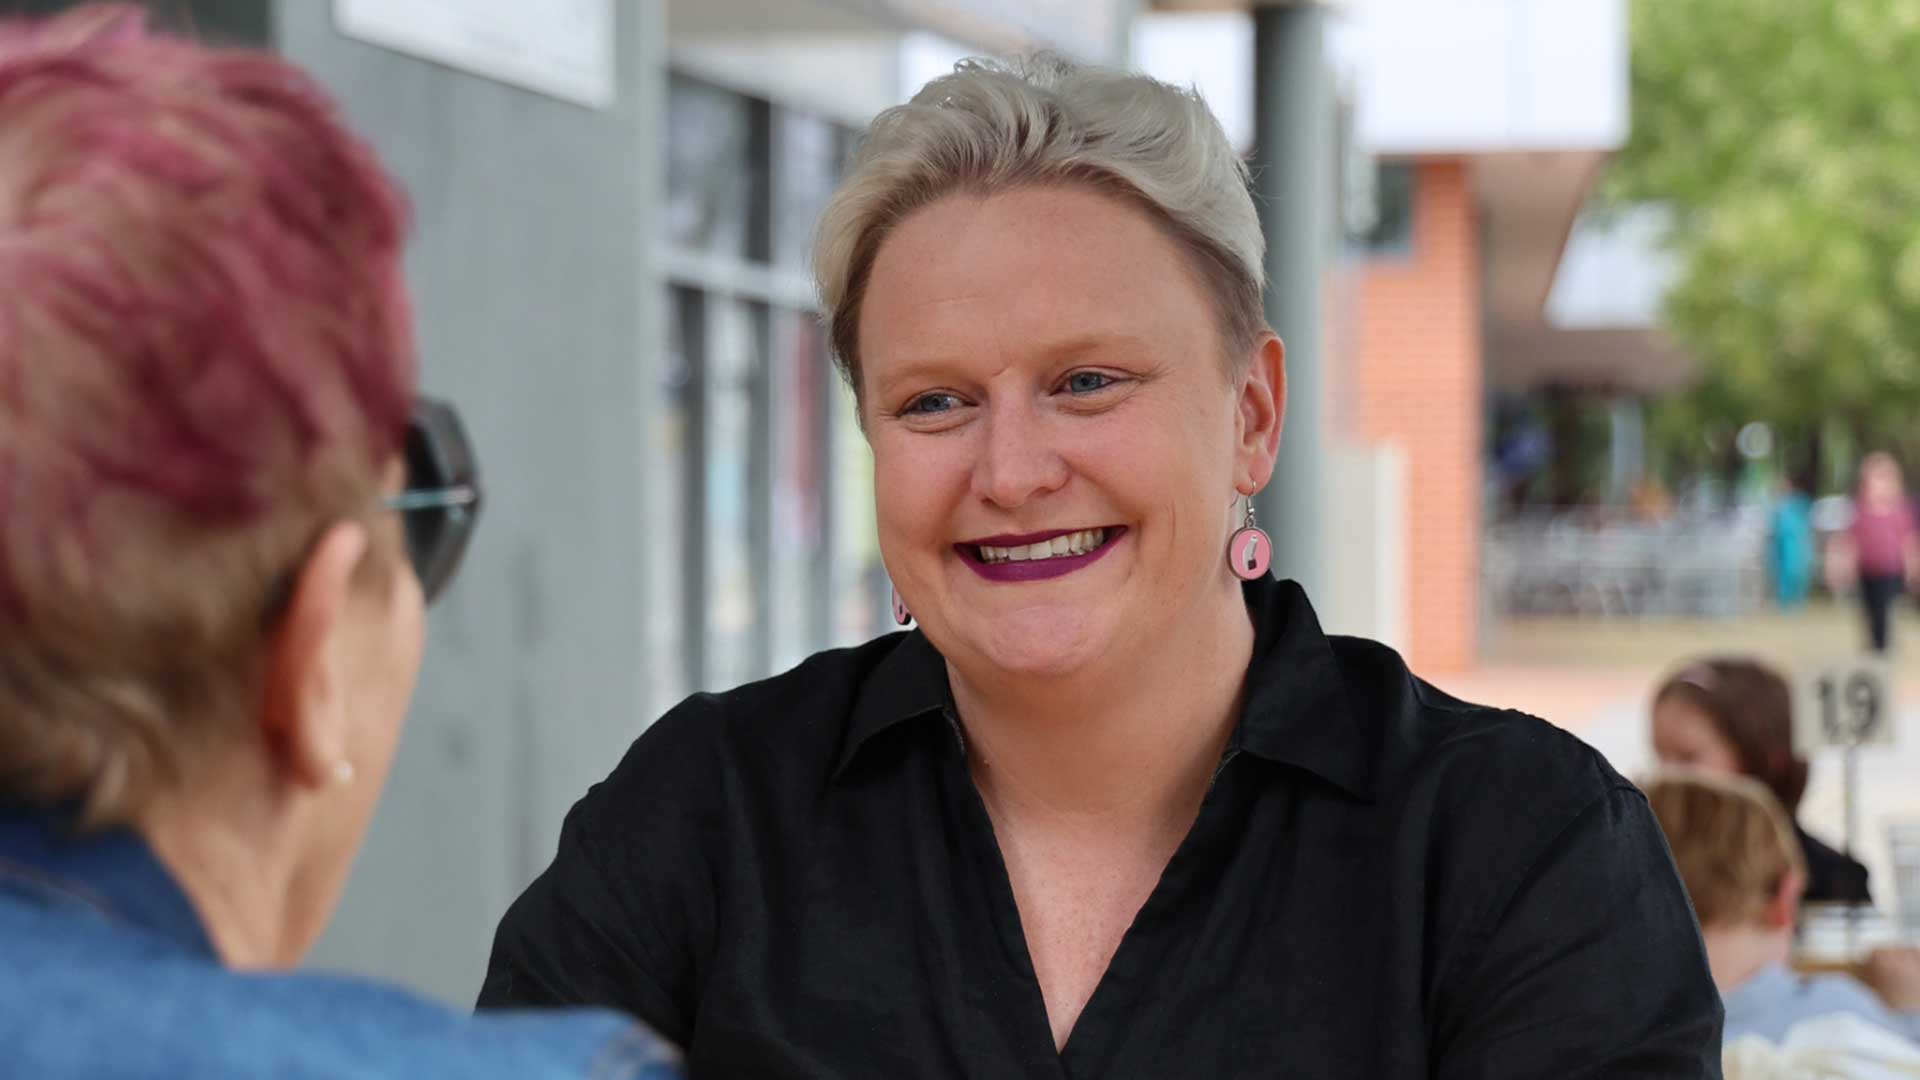 Photo of Heidi Prowse, a white woman with short bleached blond hair. She is smiling and wearing a black shirt.